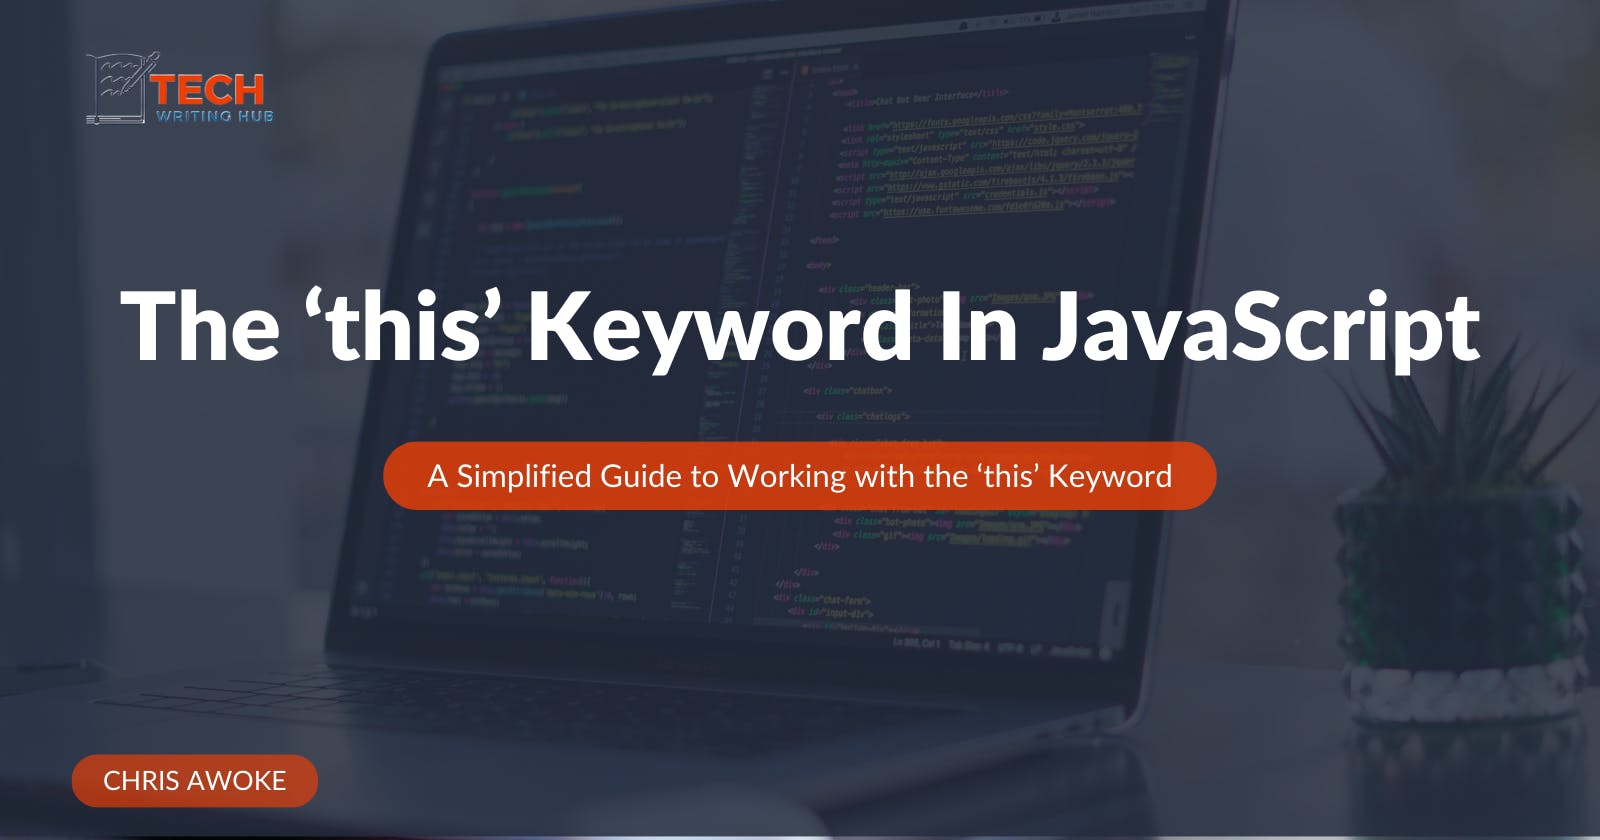 A Simplified Guide to the 'this' Keyword in JavaScript